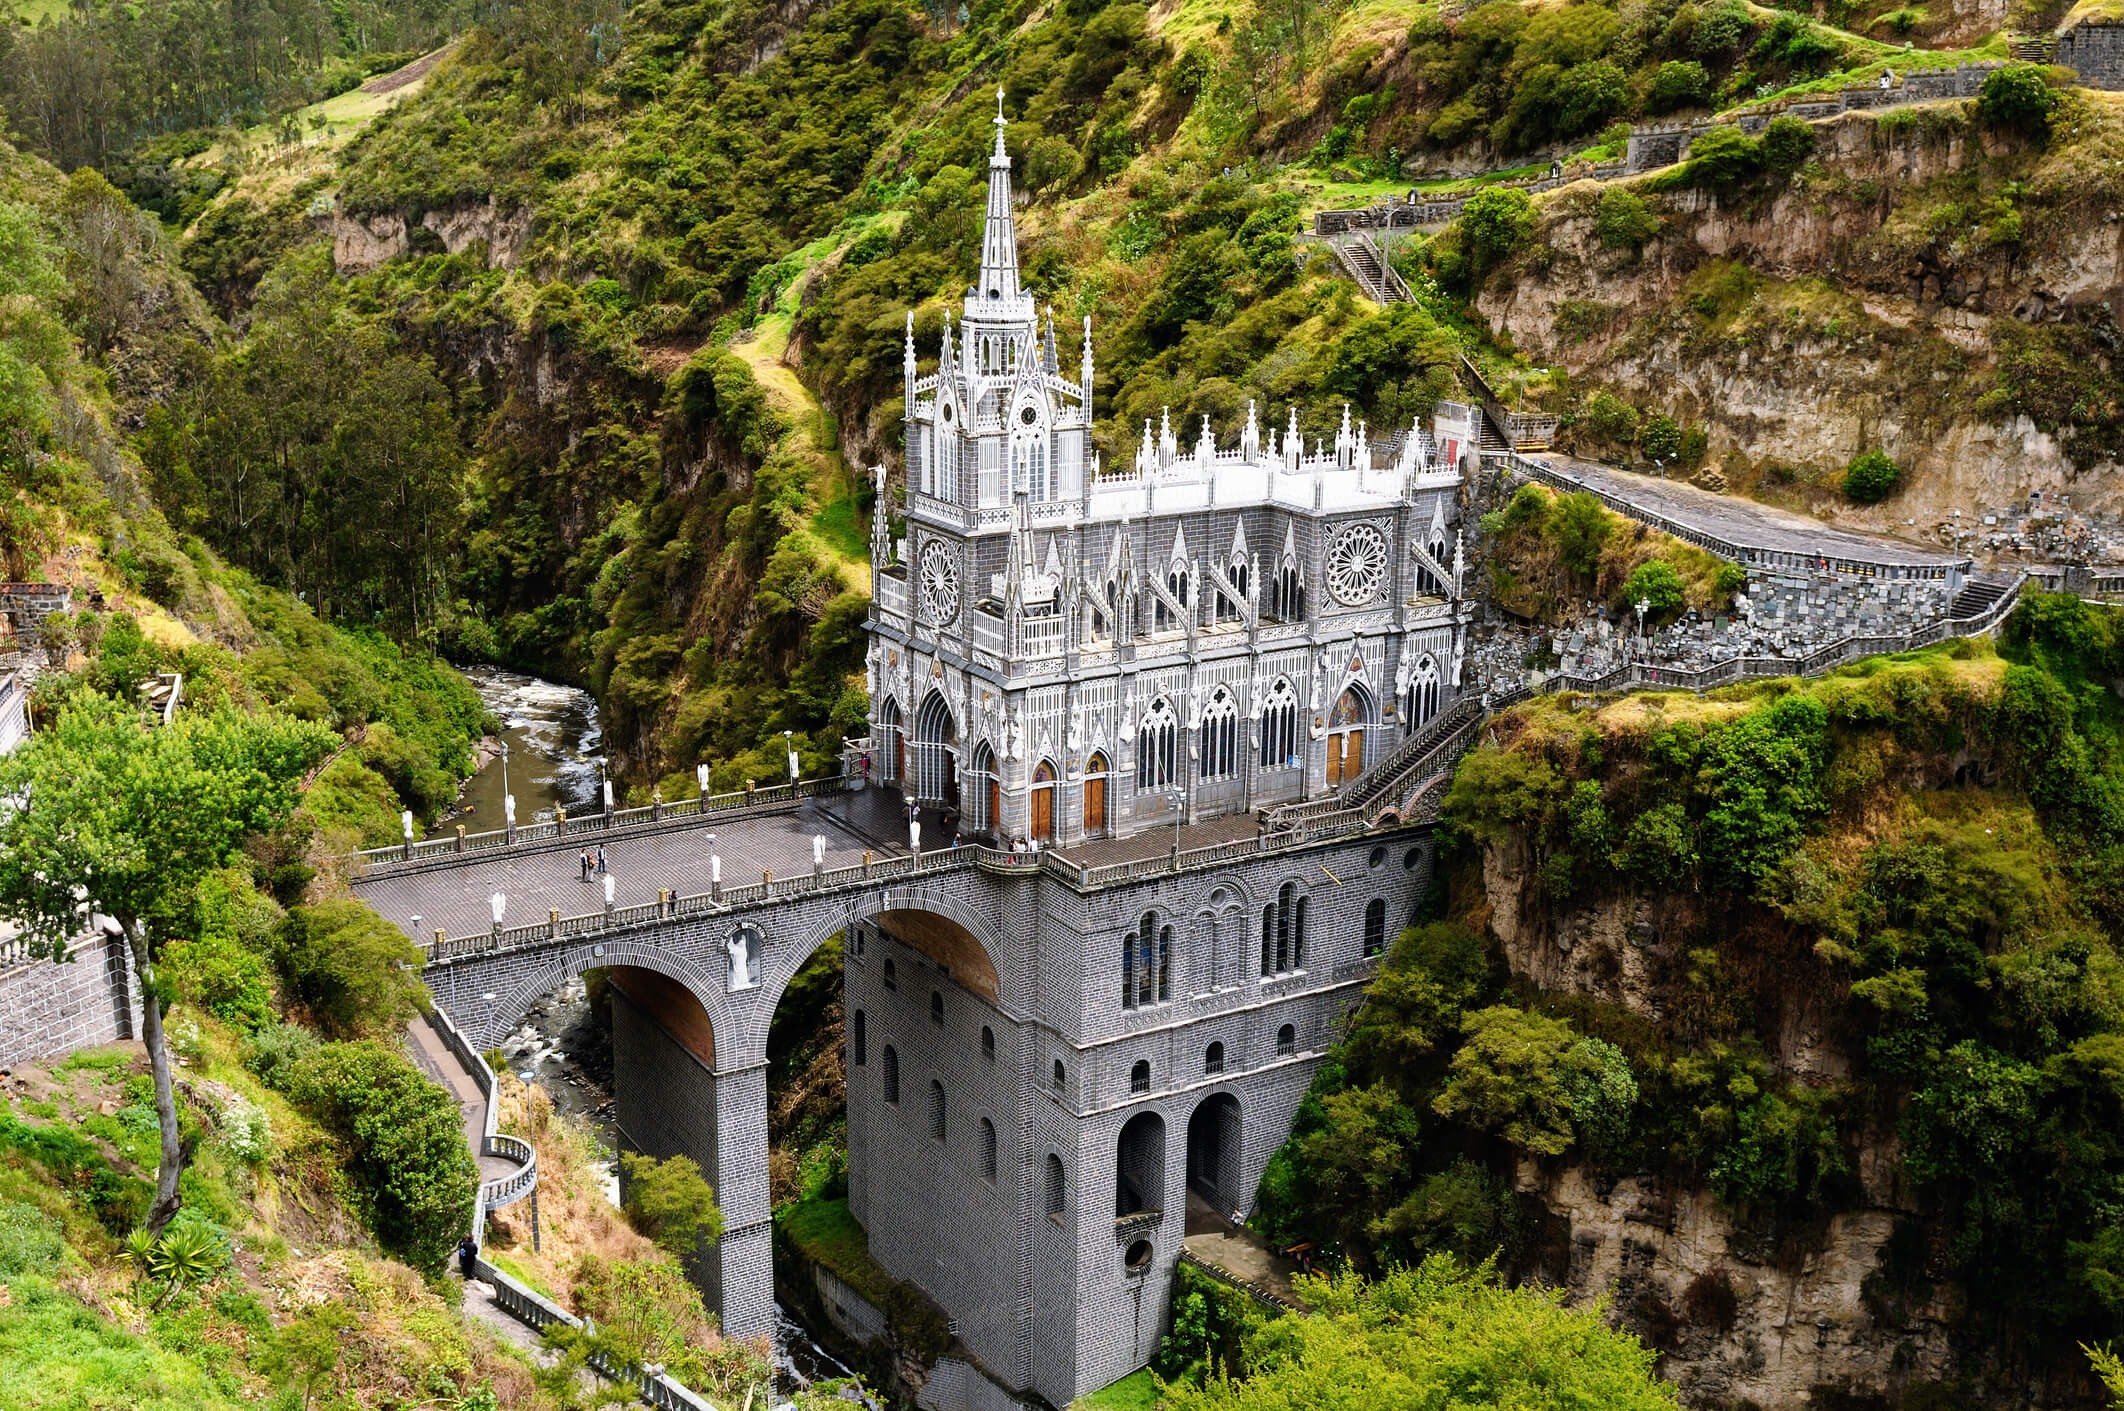 Gothic revival cathedral built into a cliffside.